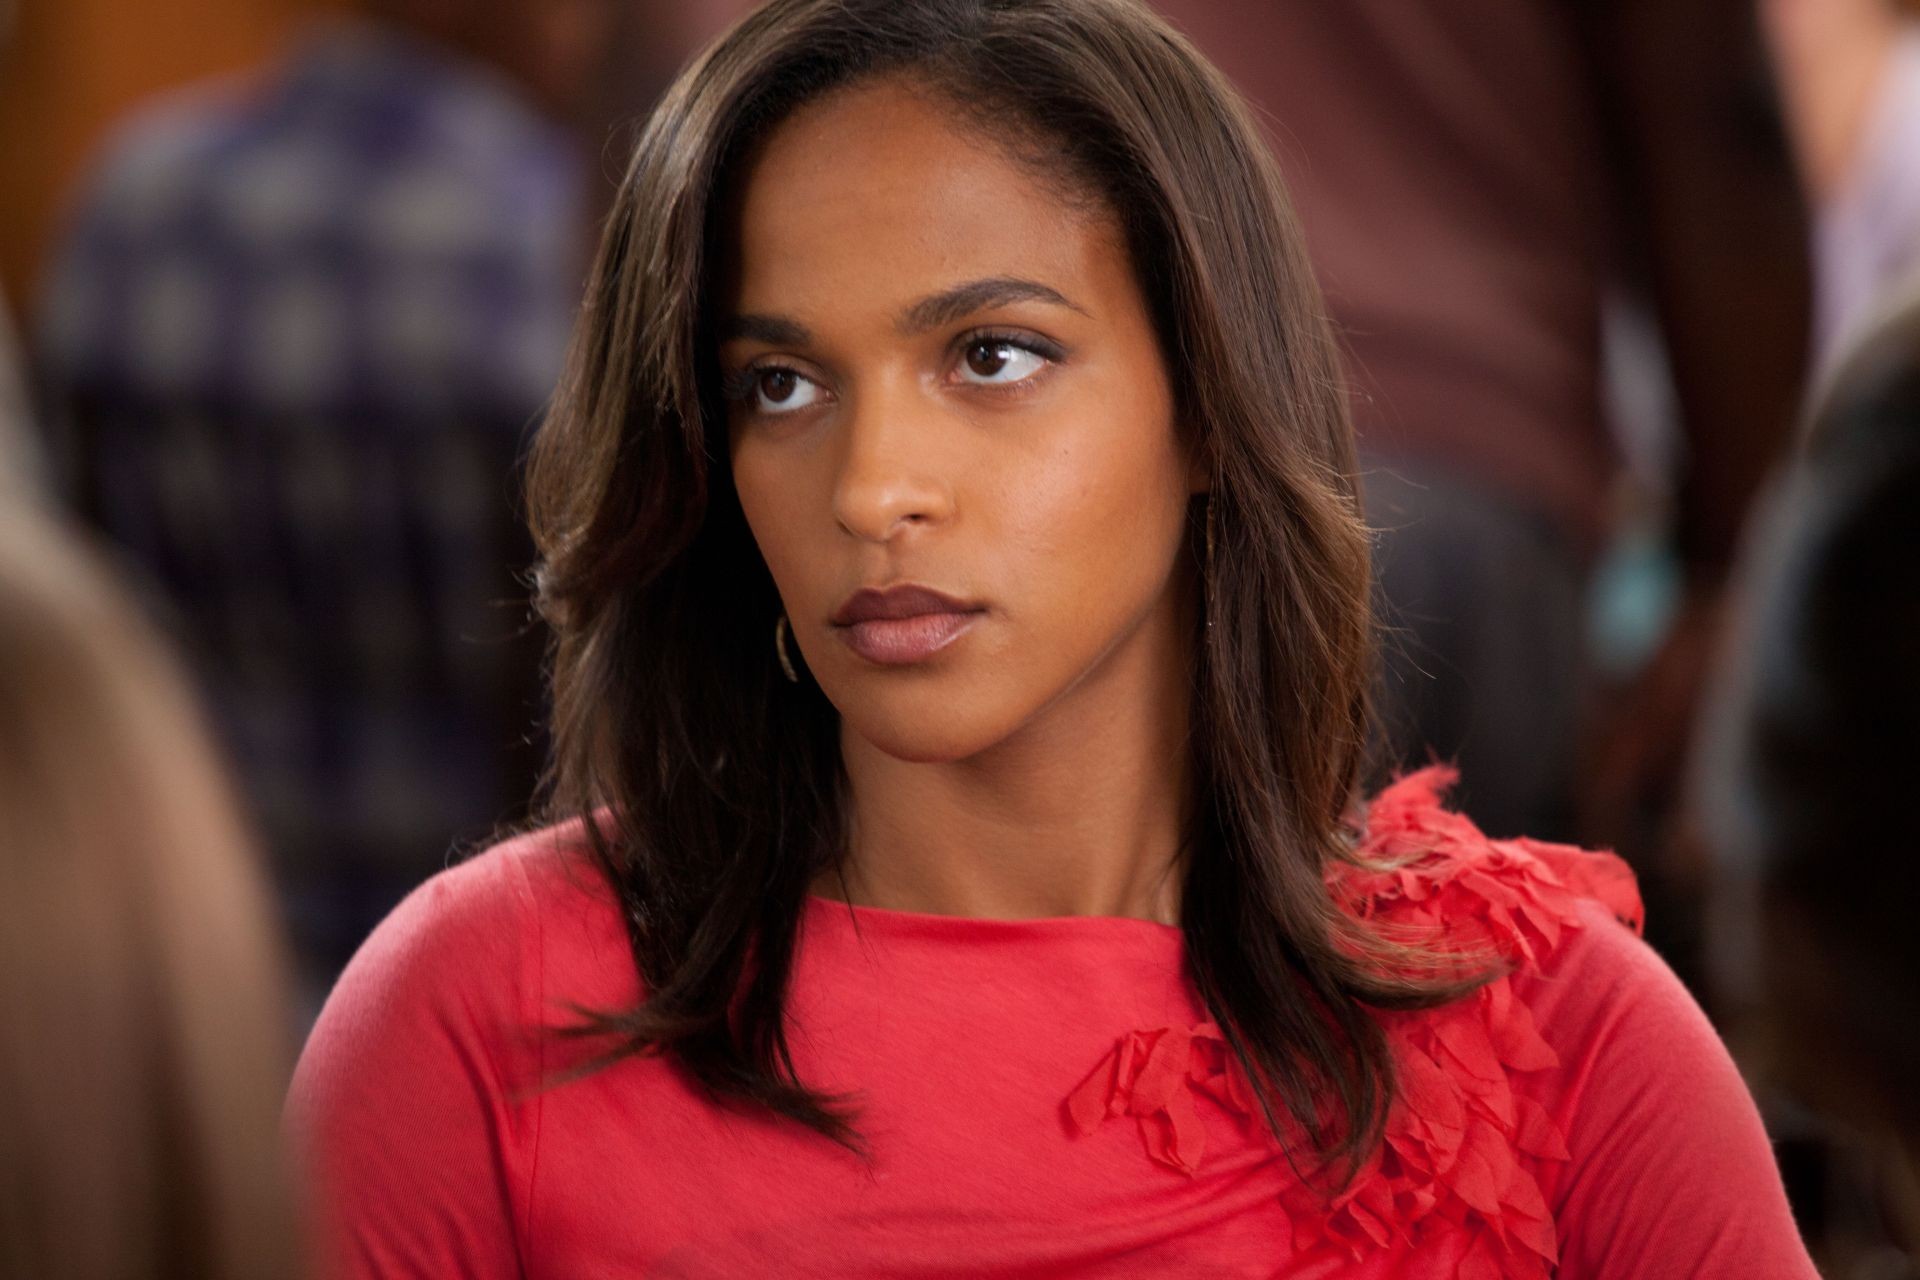 Megalyn Echikunwoke stars as Rose in Sony Pictures Classics' Damsels in Distress (2012). Photo credit by Sabrina Lantos.